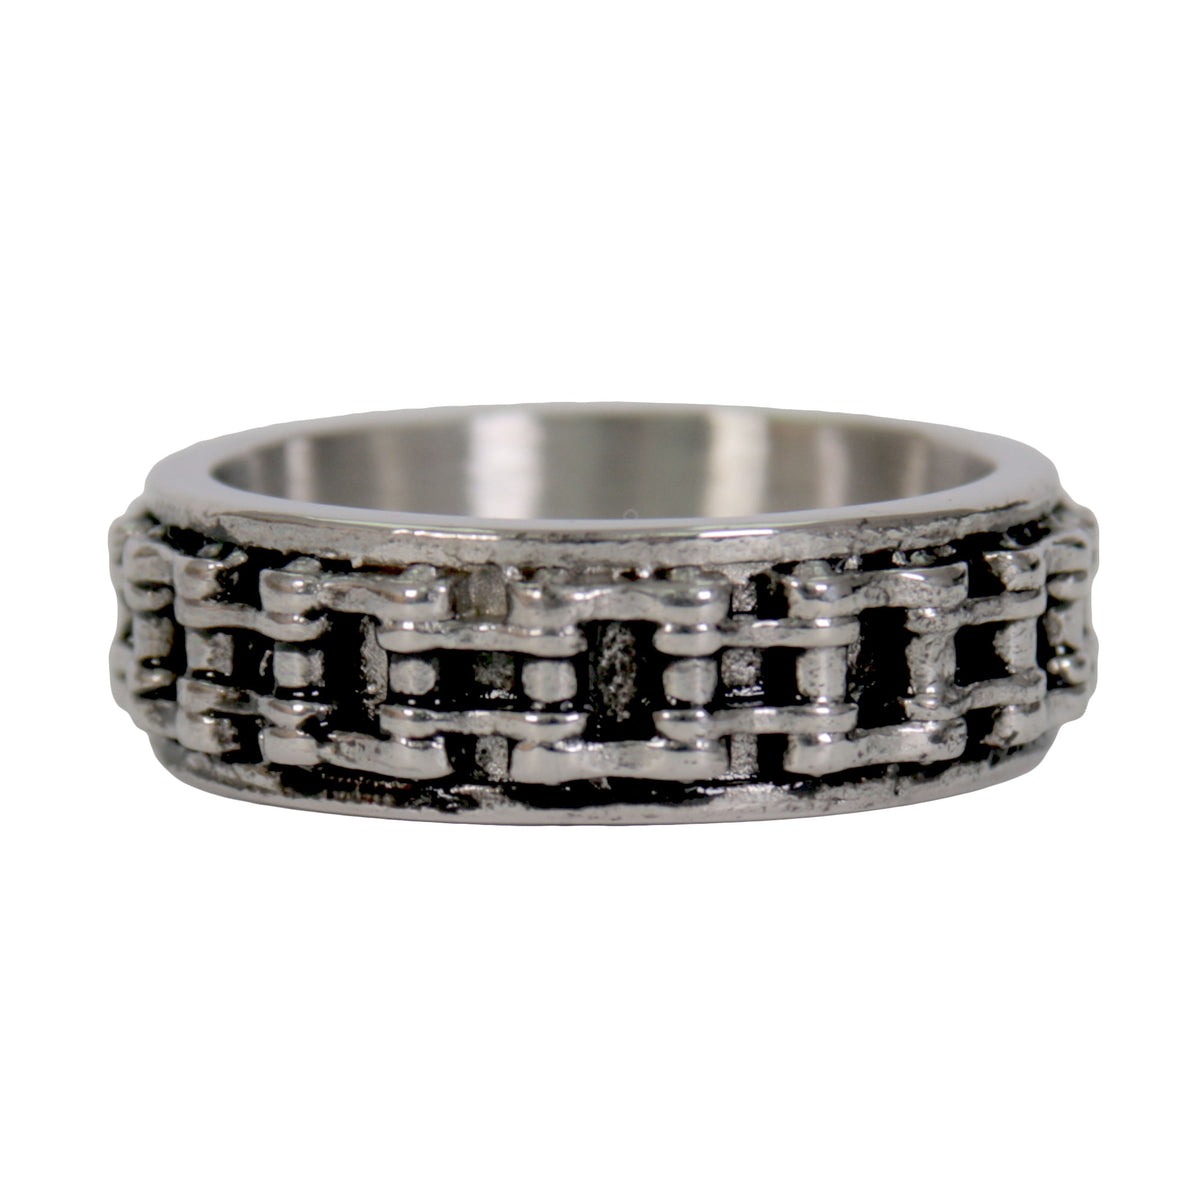 Hot Leathers JWR2140 Men's Silver 'Bike Chain' Stainless Steel Ring